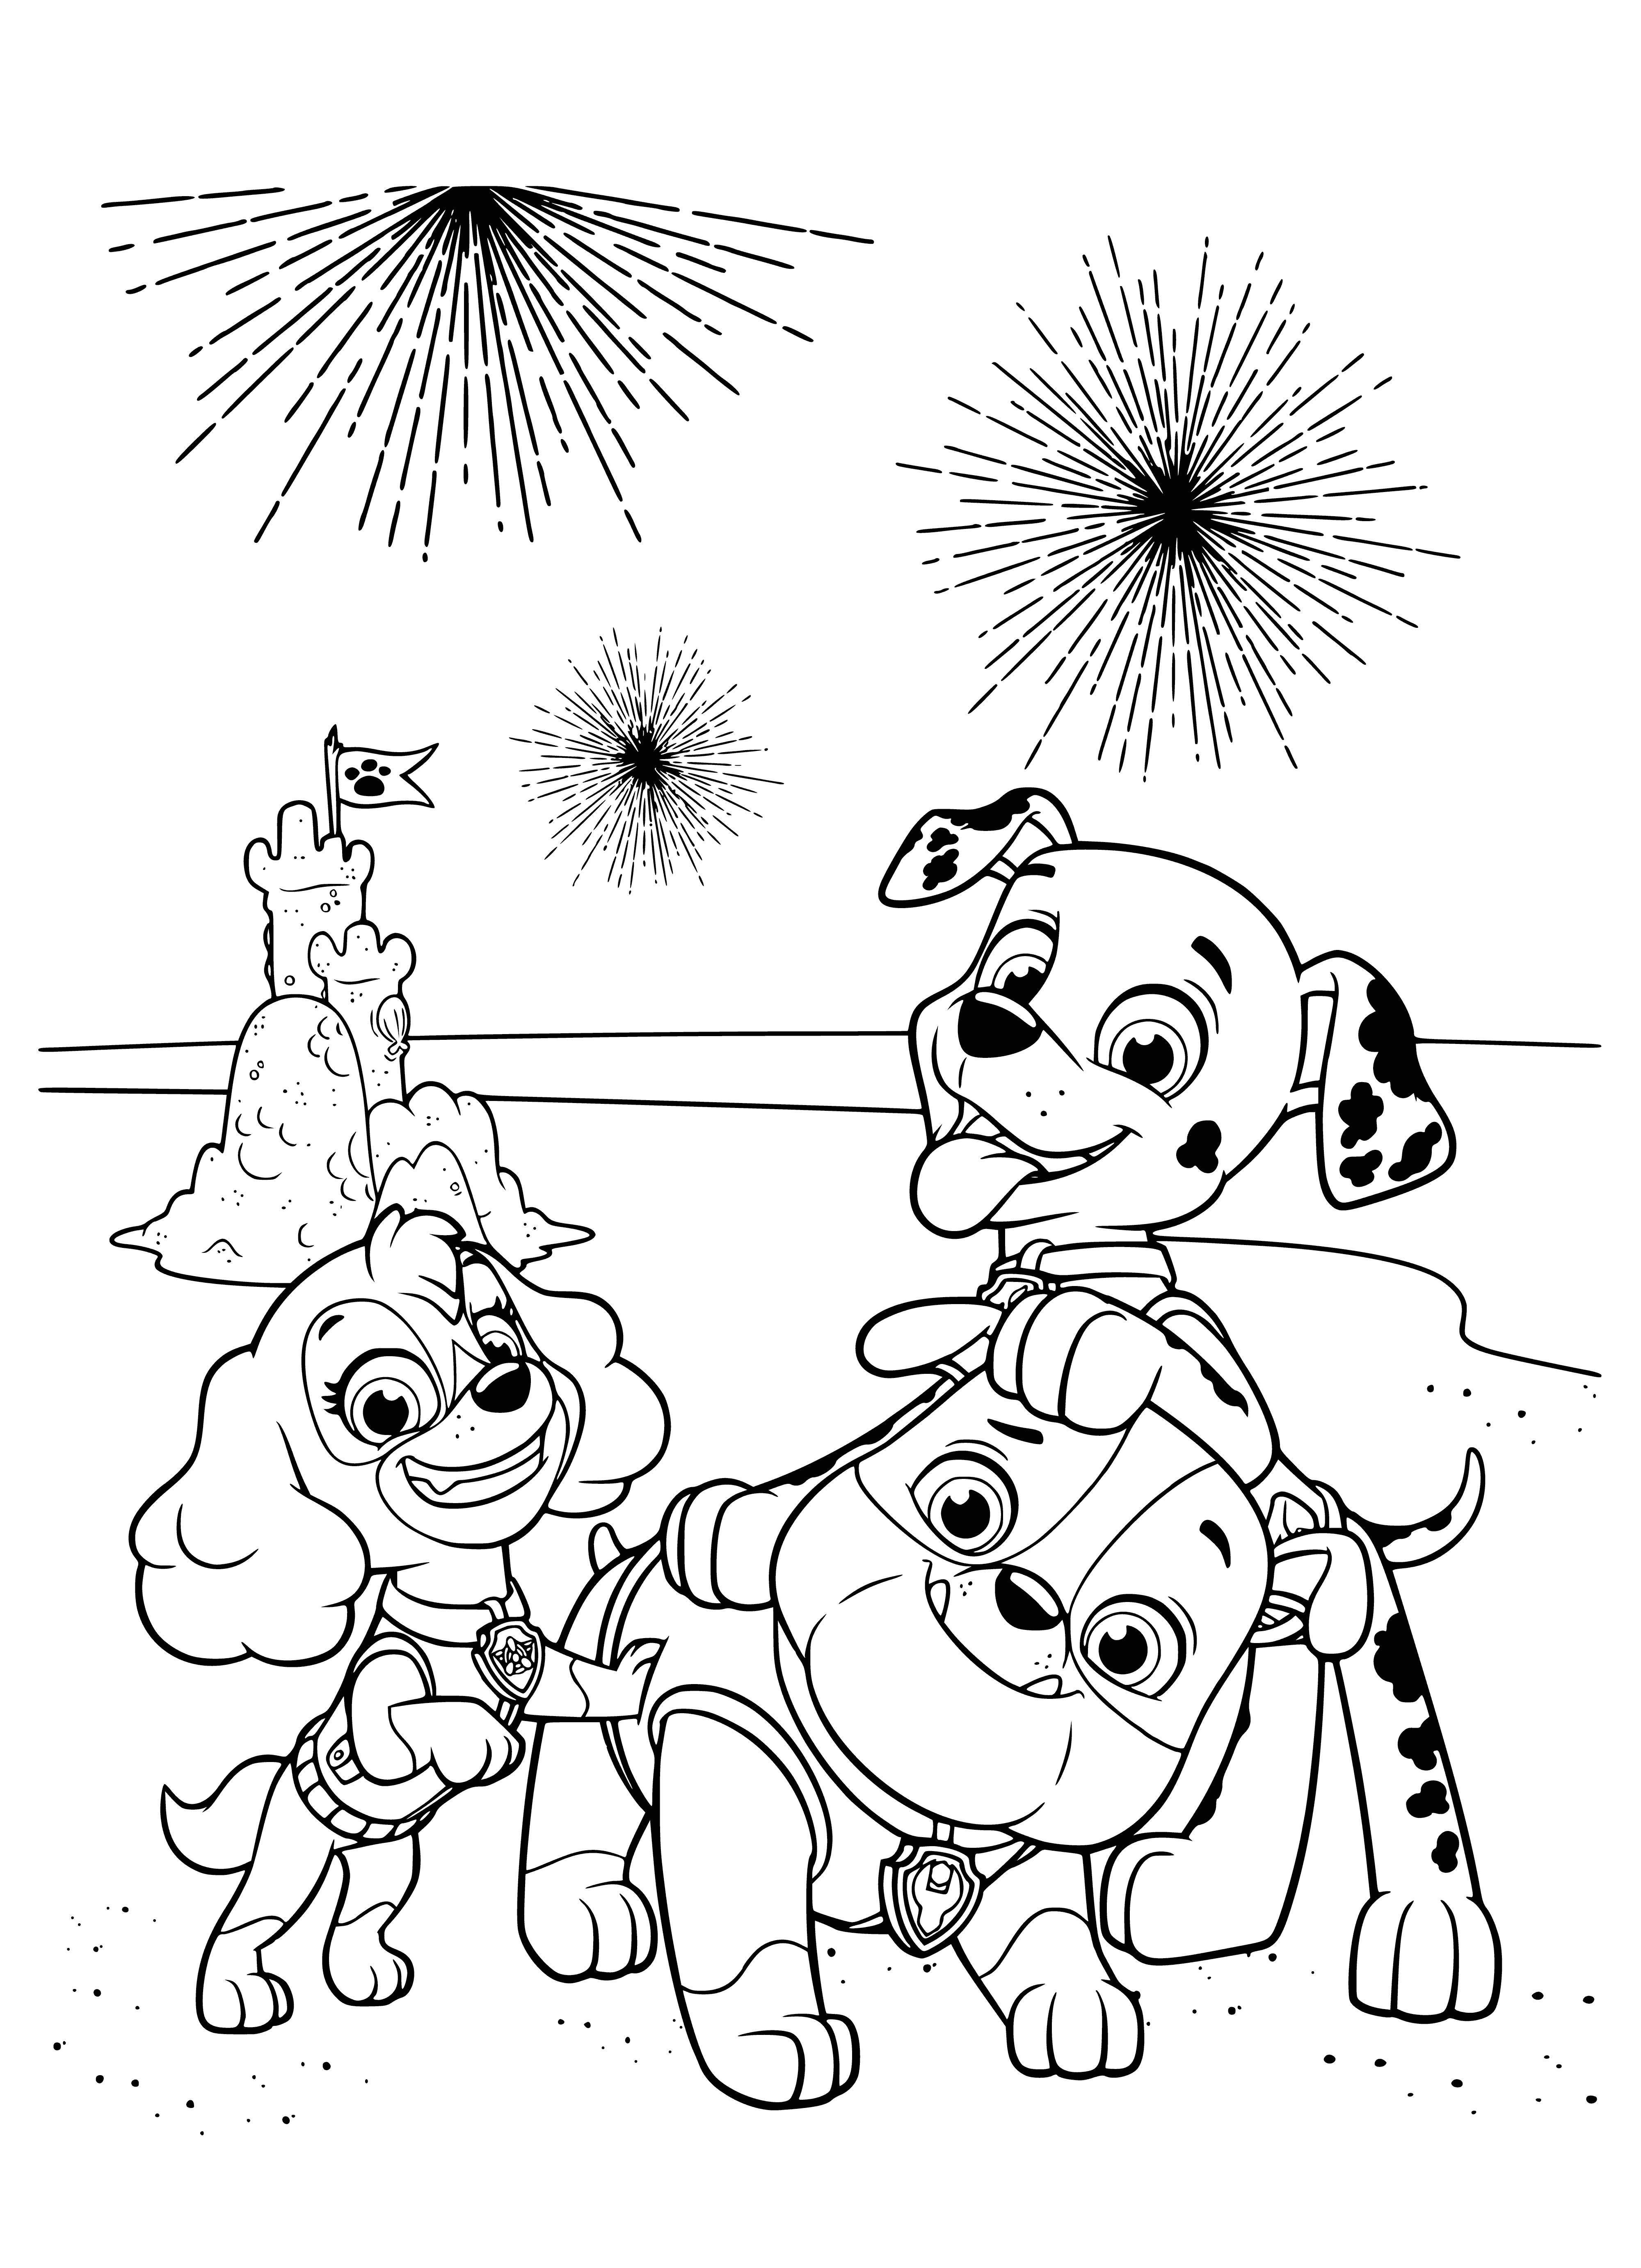 coloring page: The PAW Patrol is on a high-flying adventure! Skye, Strong and Marshal jet pack to save the day! #PawPatrol #SaveTheDay